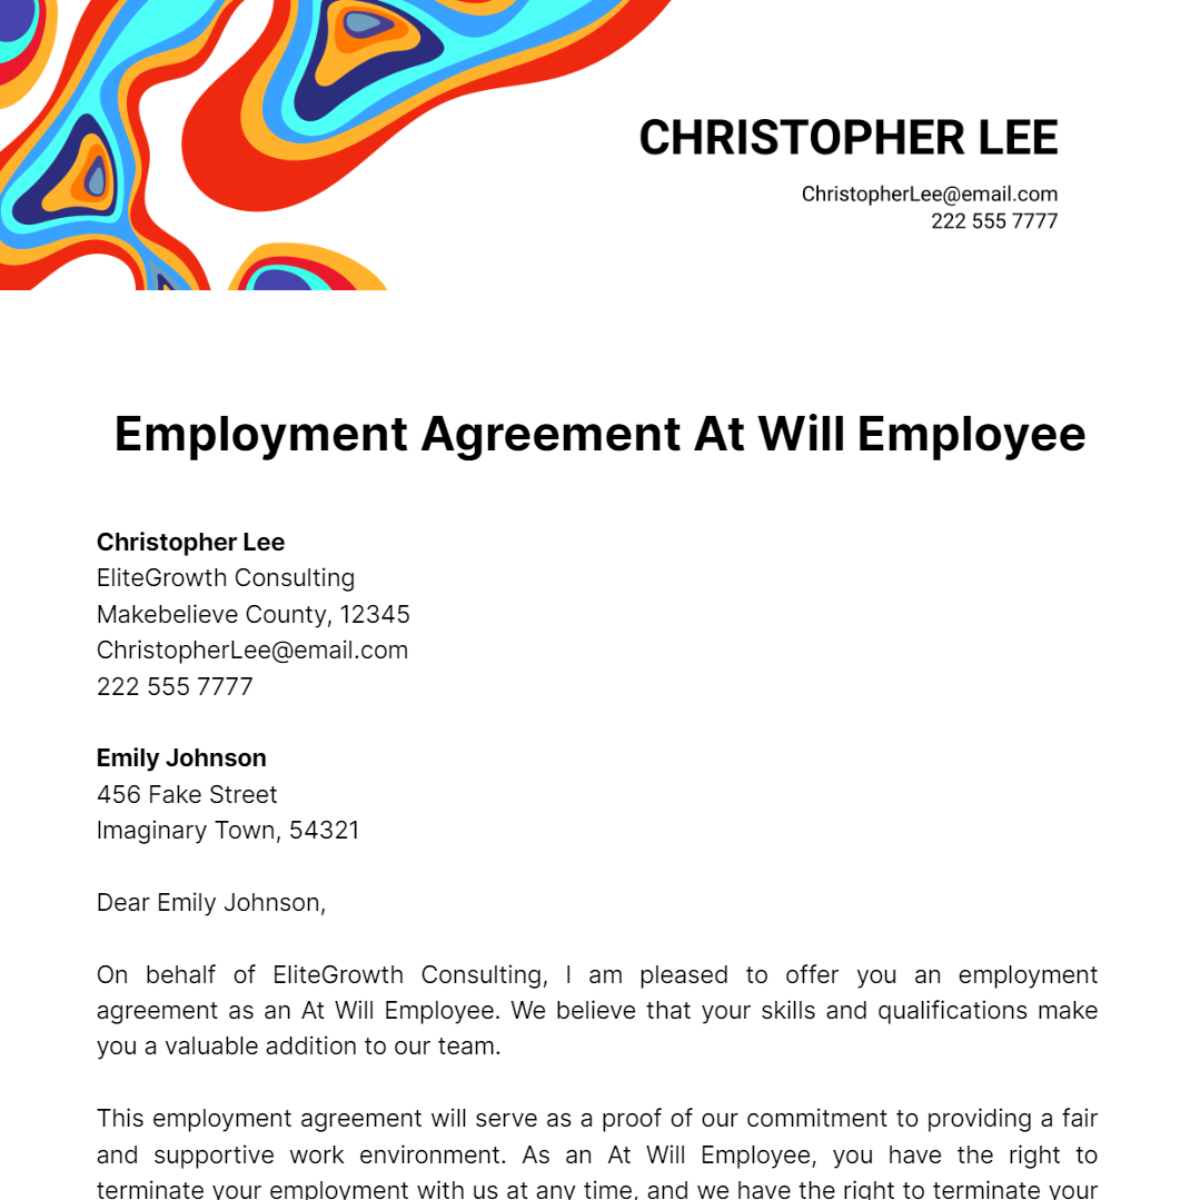 Employment Agreement At Will Employee Template